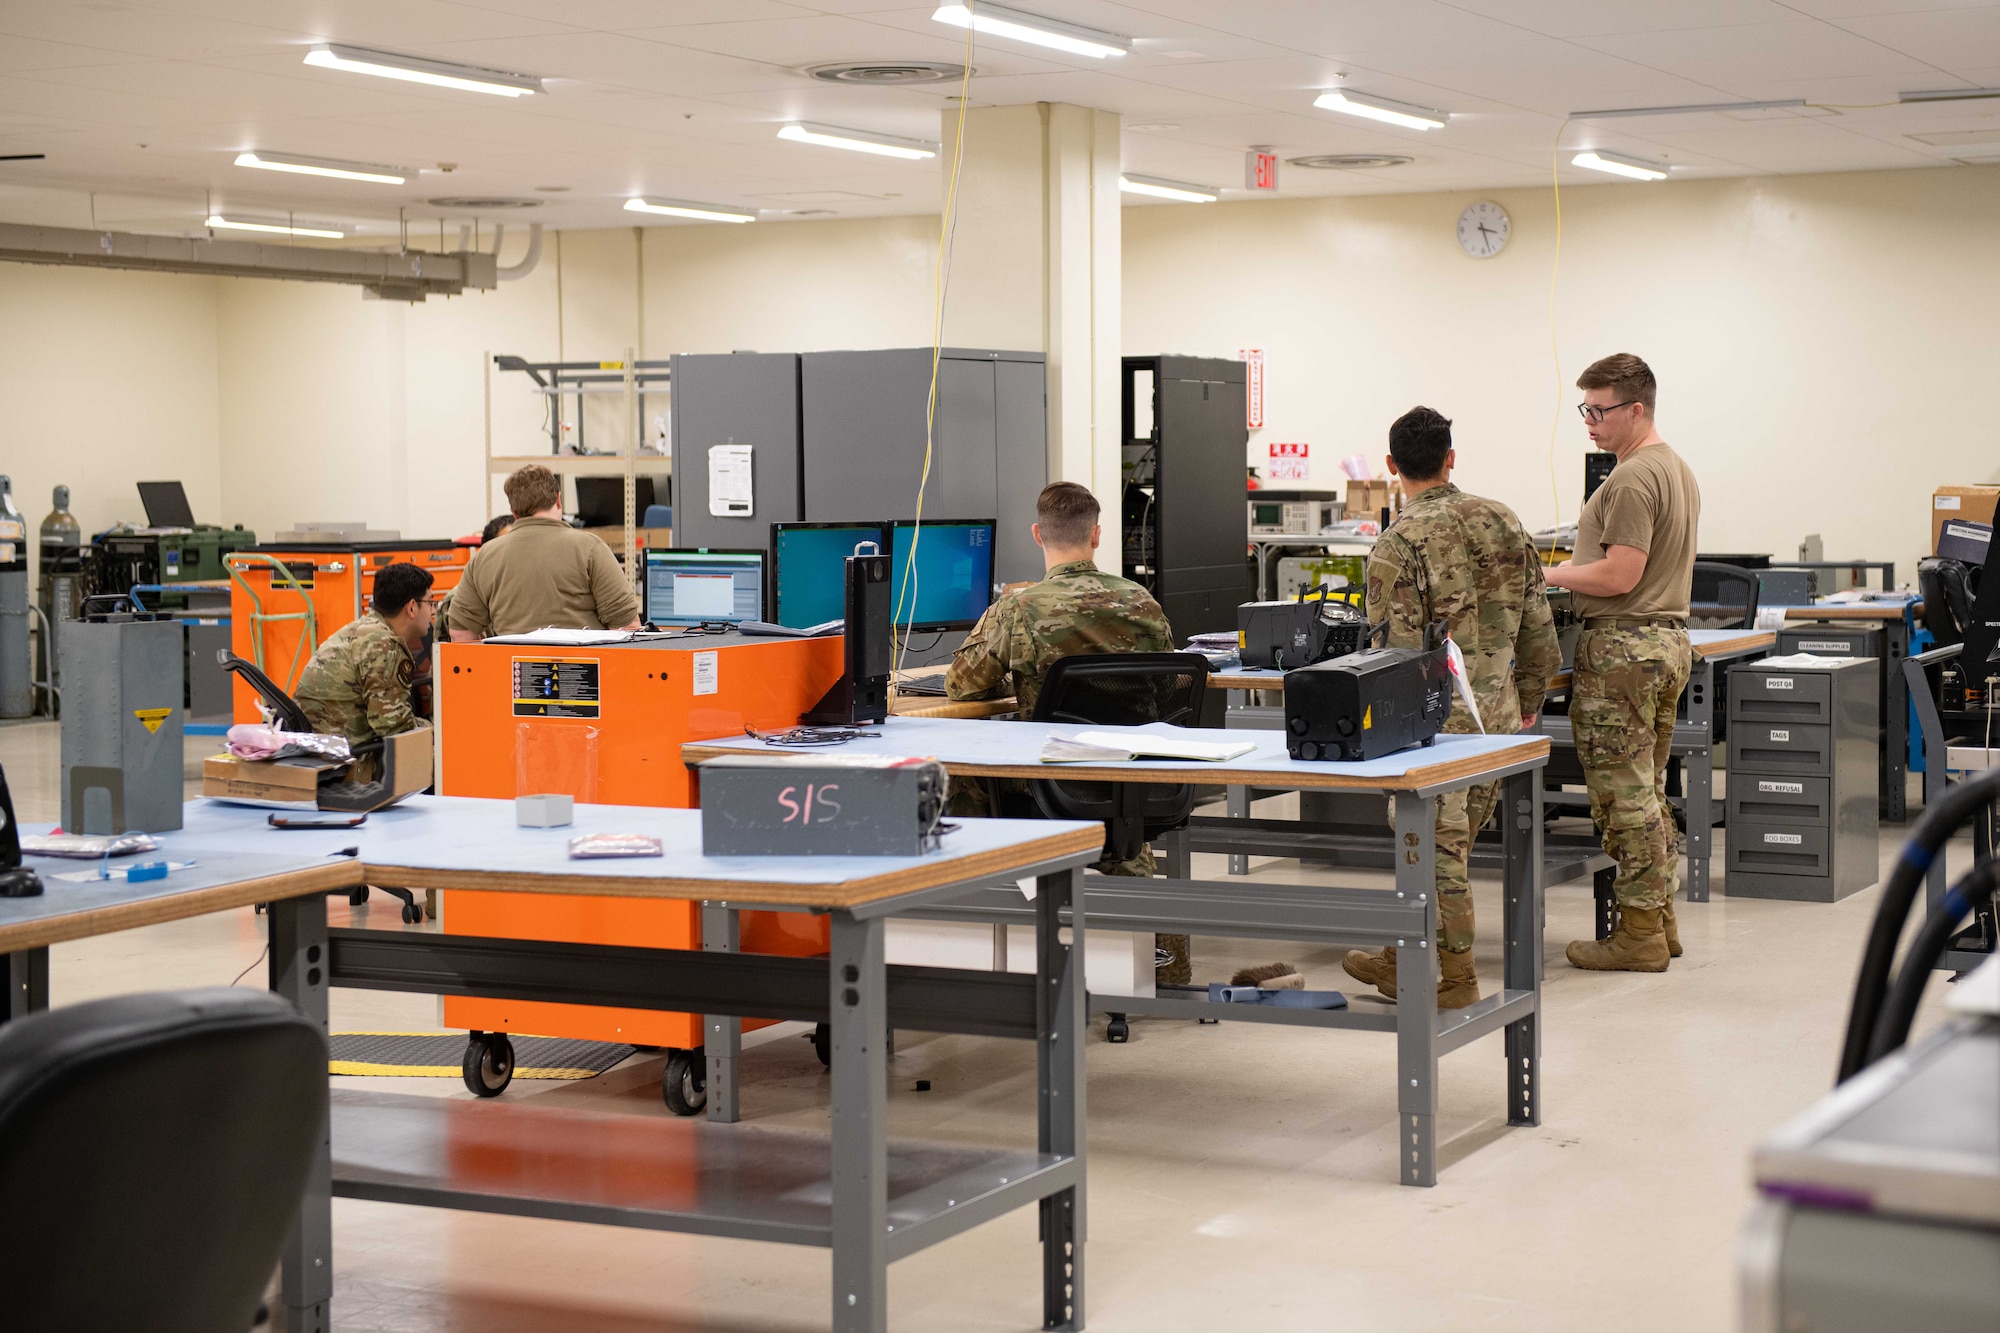 A group of Airmen work around desks and tables in the avionics section of a shop